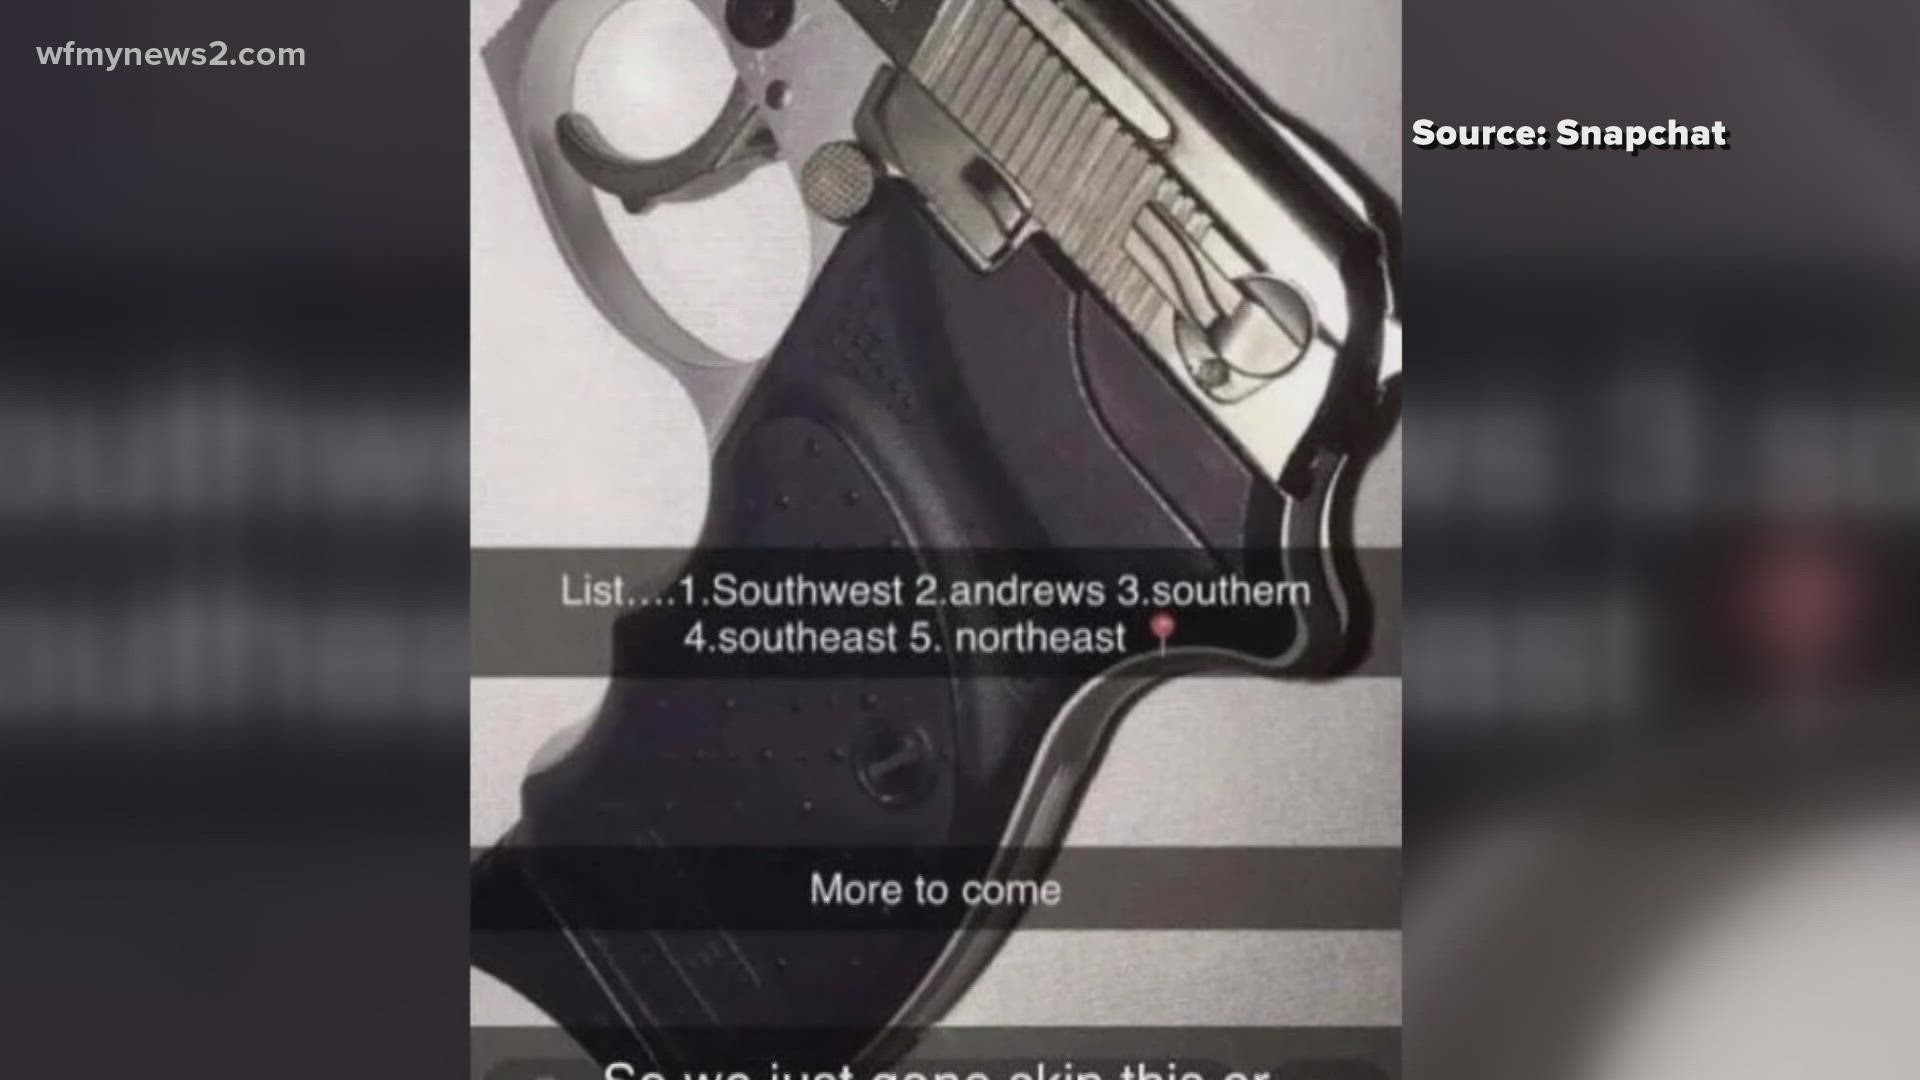 A Southwest High School student was arrested after police say he was making threatening social media posts against five Guilford County schools.